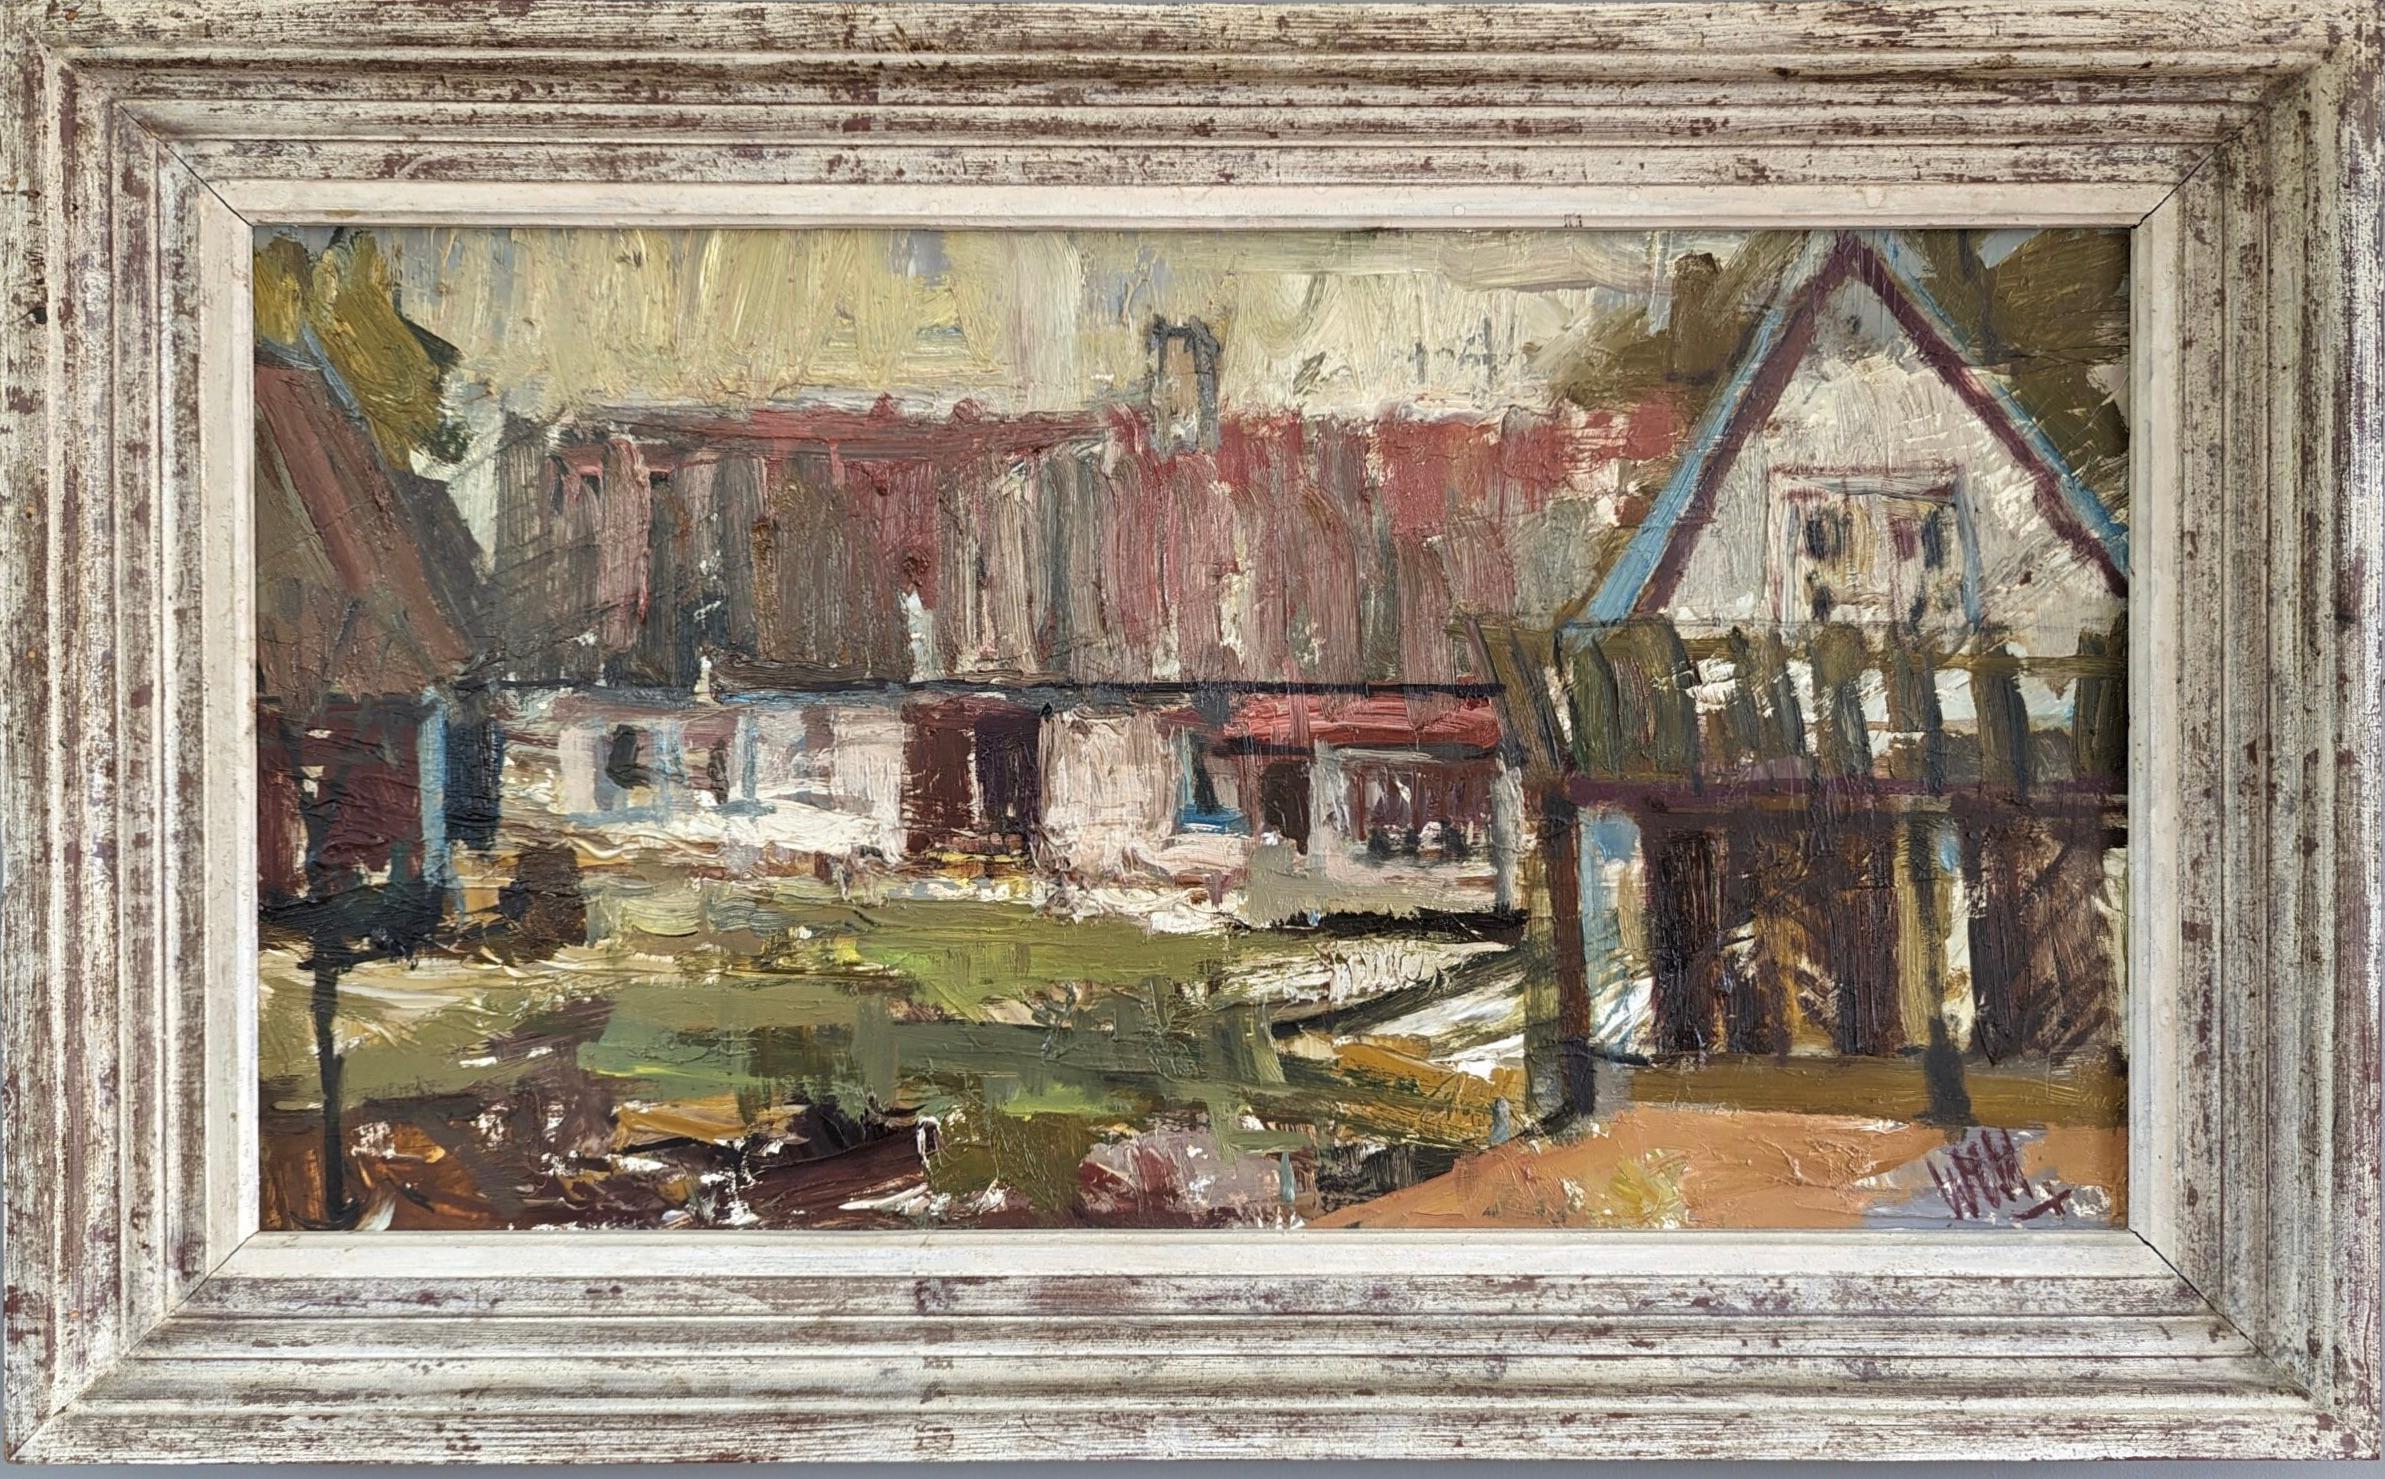 Unknown Landscape Painting - Vintage Mid-Century Swedish Expressionist Landscape Oil Painting - At the Farm